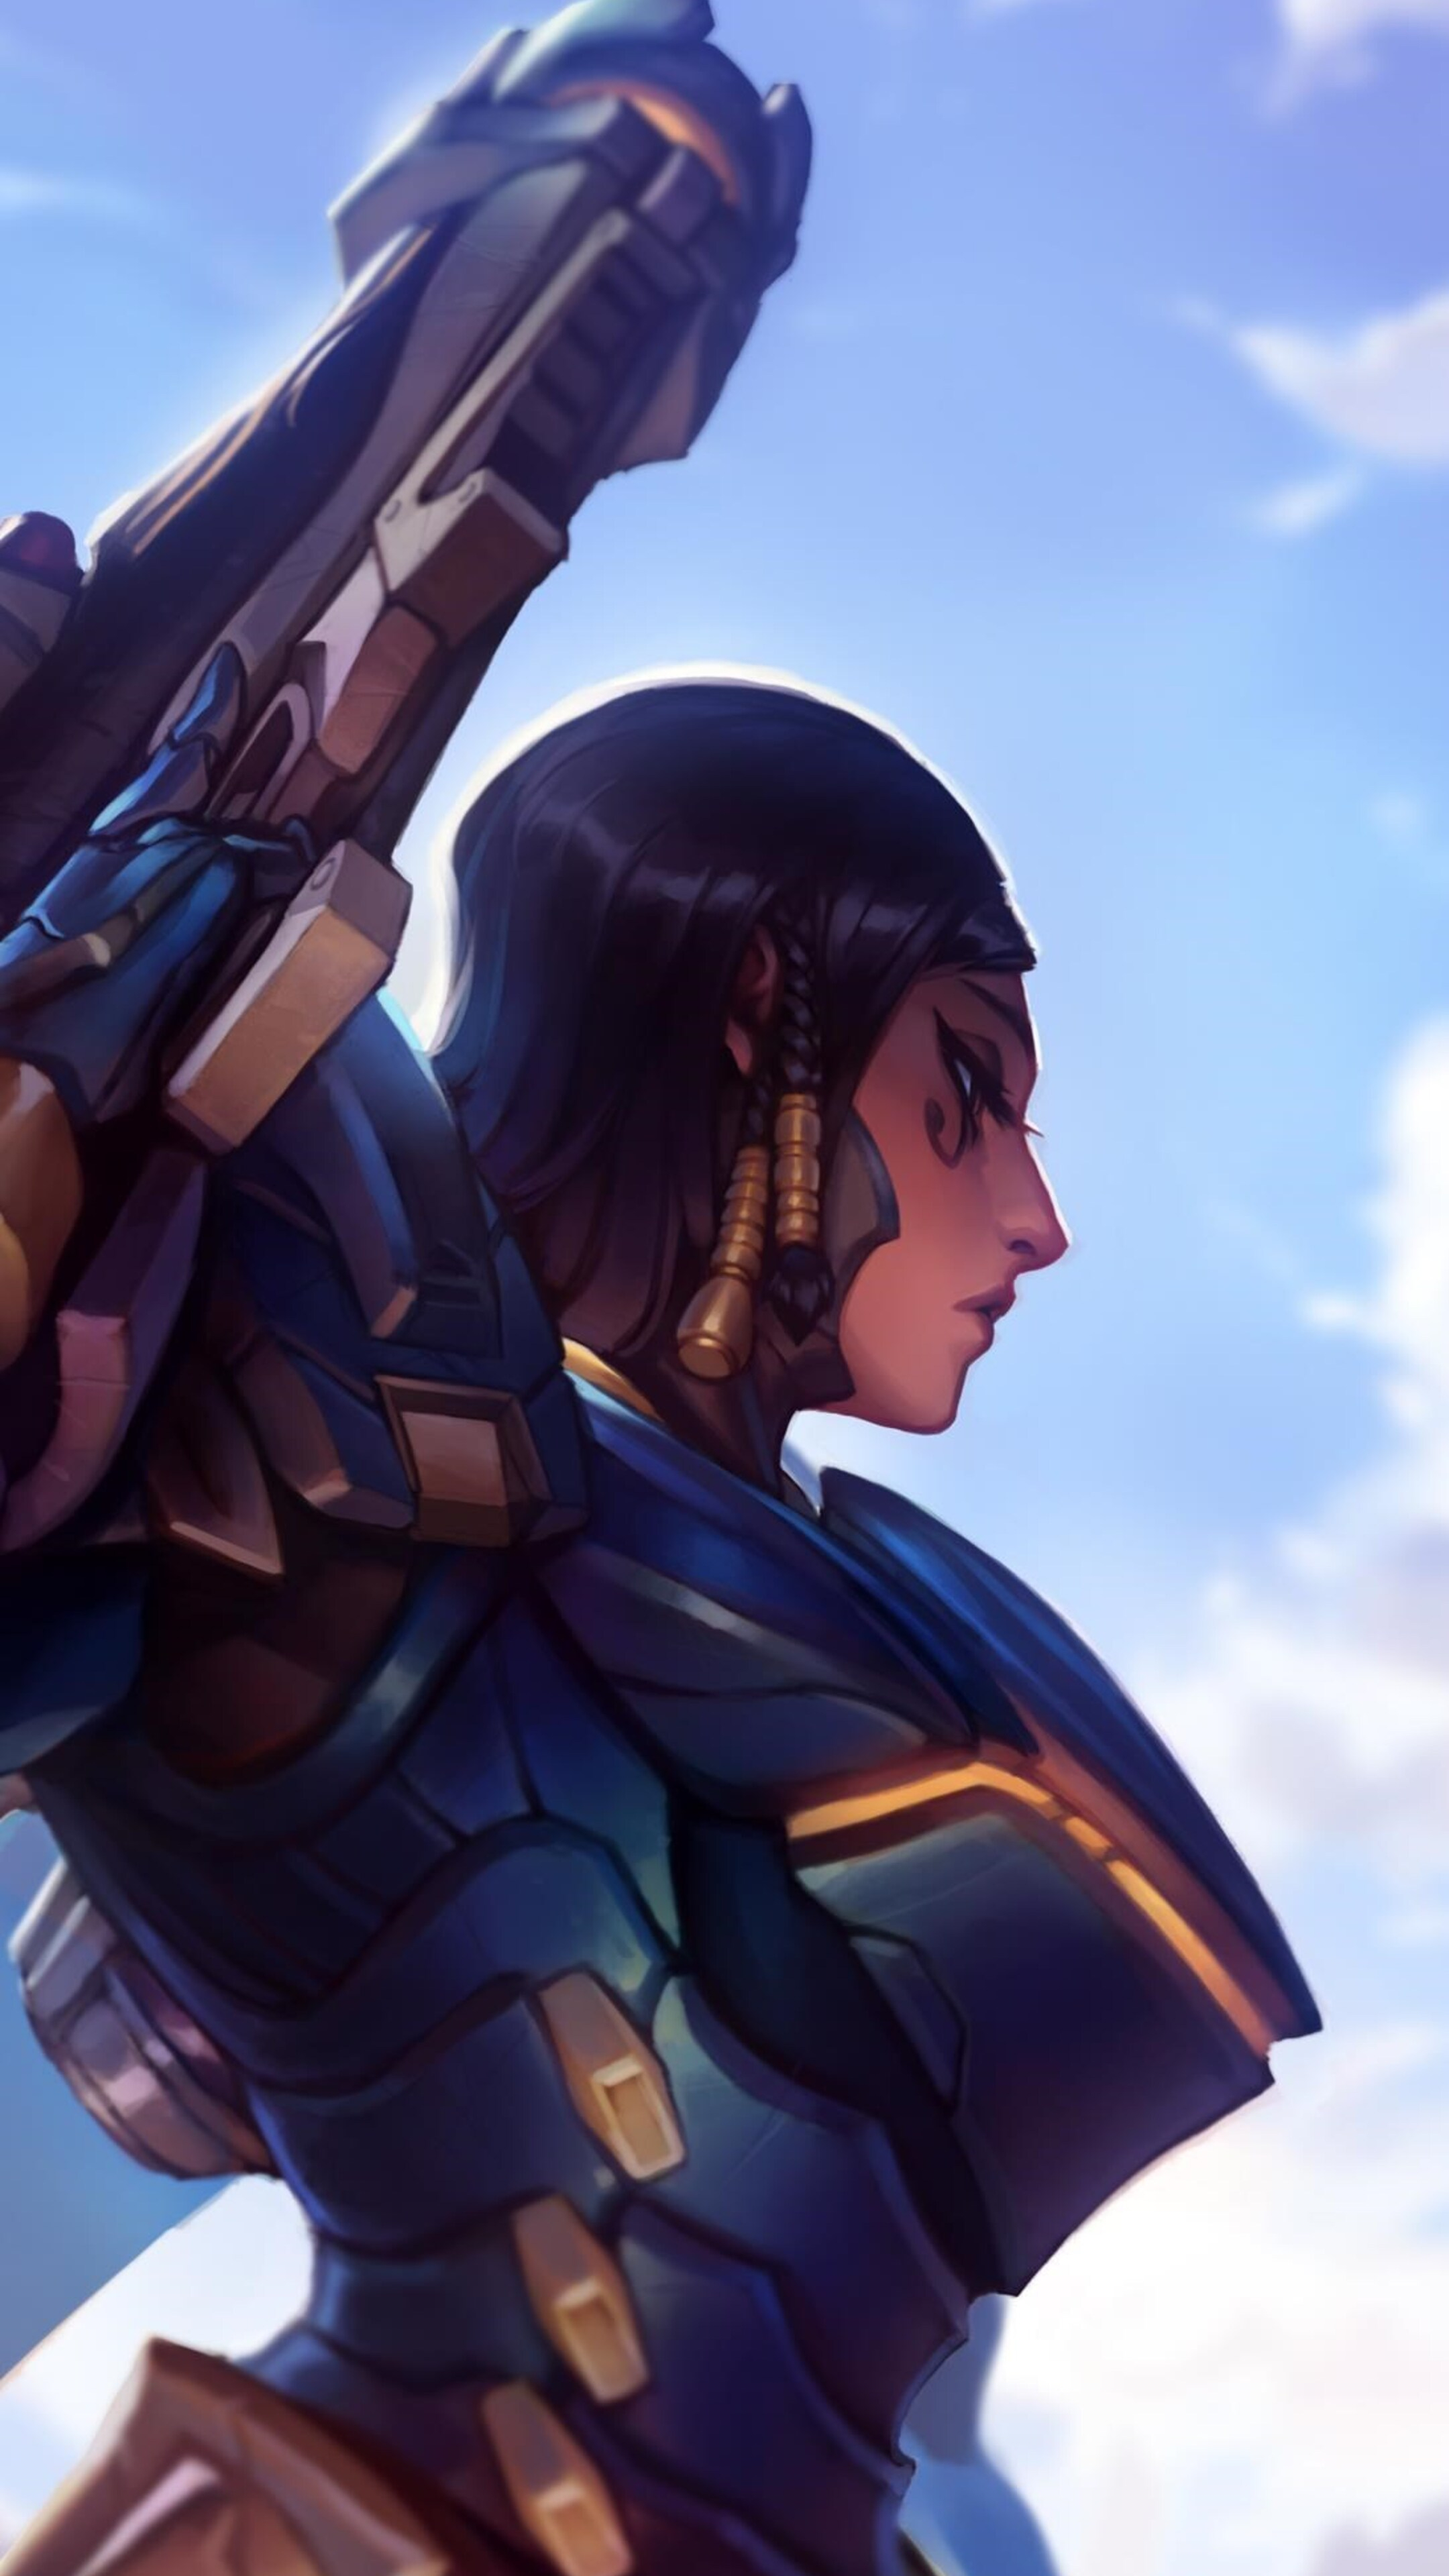 2160x3840 Pharah Overwatch Art By KNKL Sony Xperia X,XZ,Z5 Premium HD 4k Wallpapers, Images, Backgrounds, Photos and Pictures